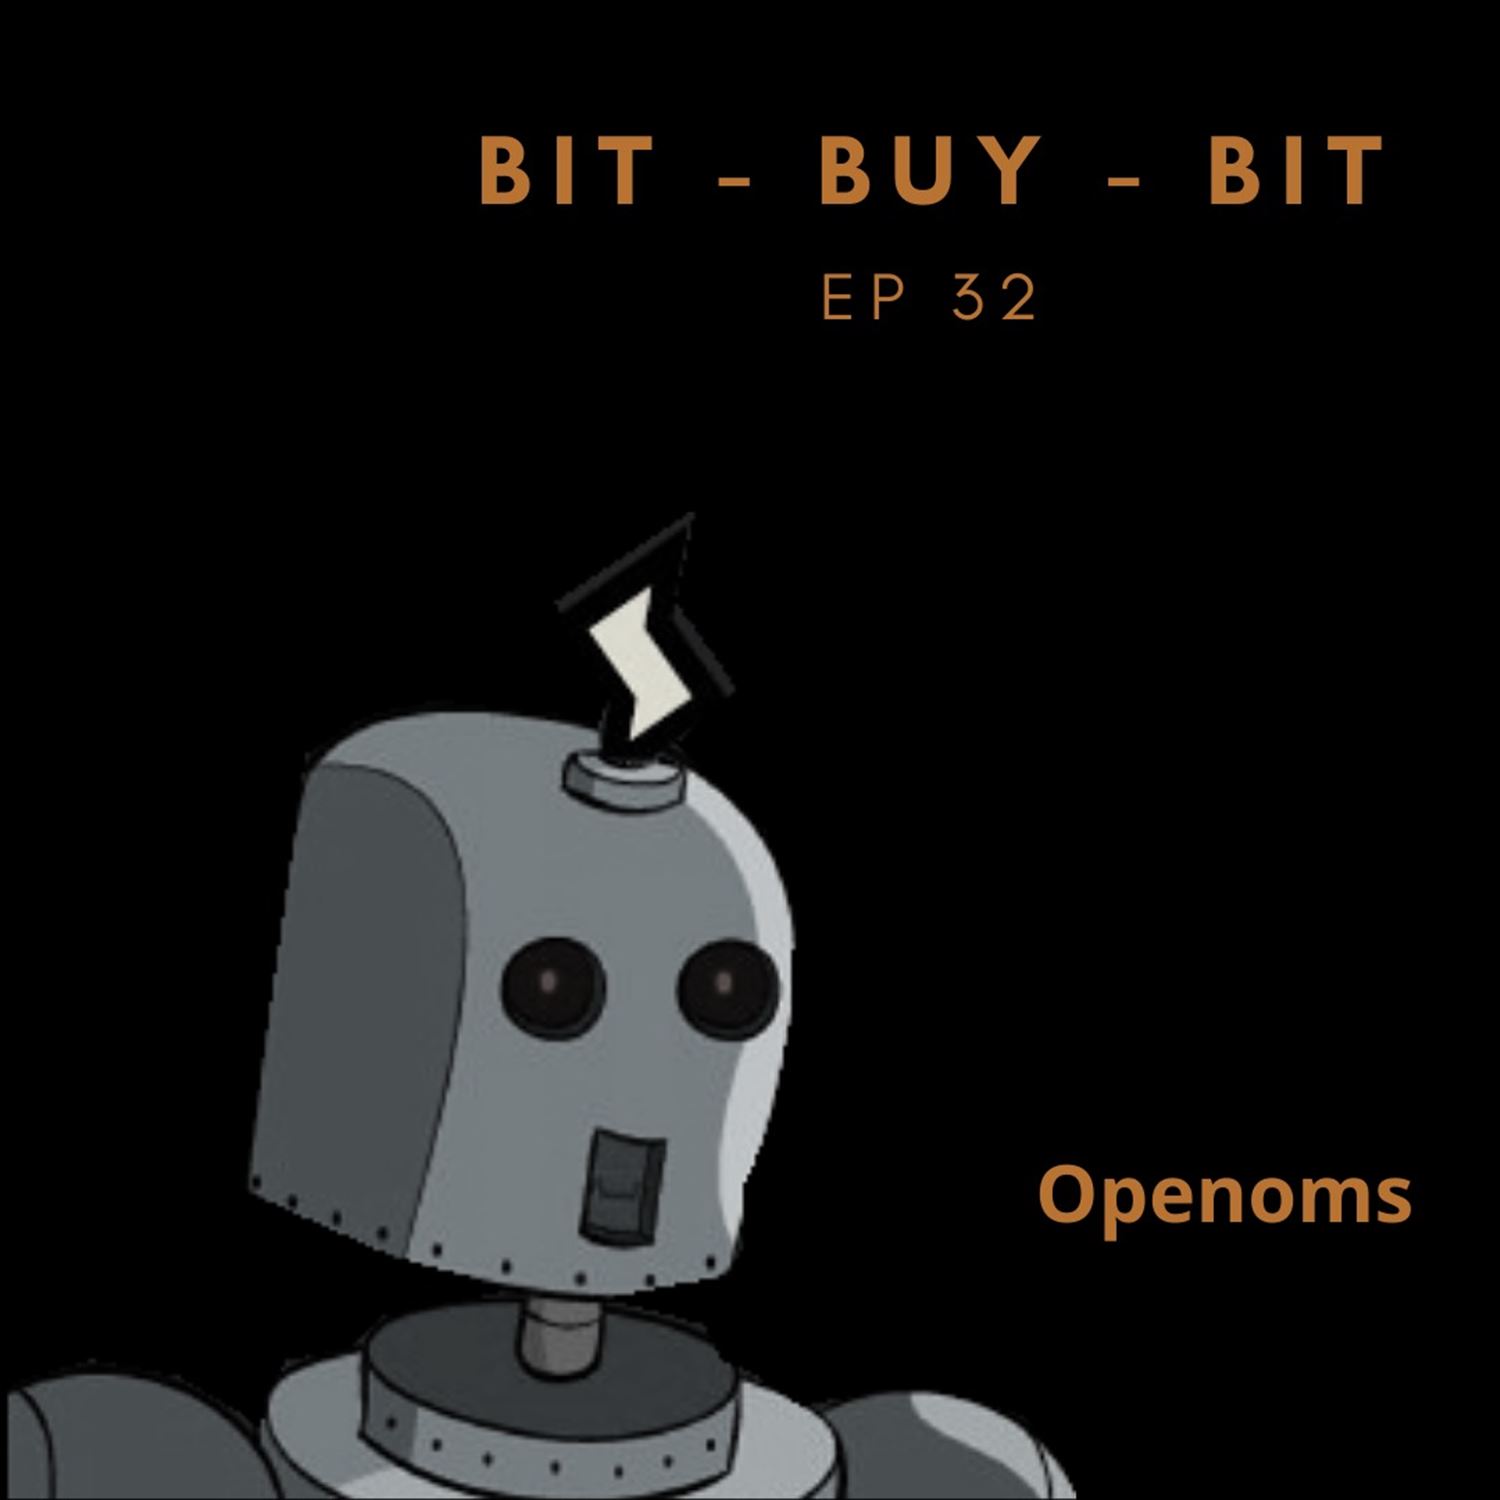 EP32 Bitcoin podcast with Openoms.